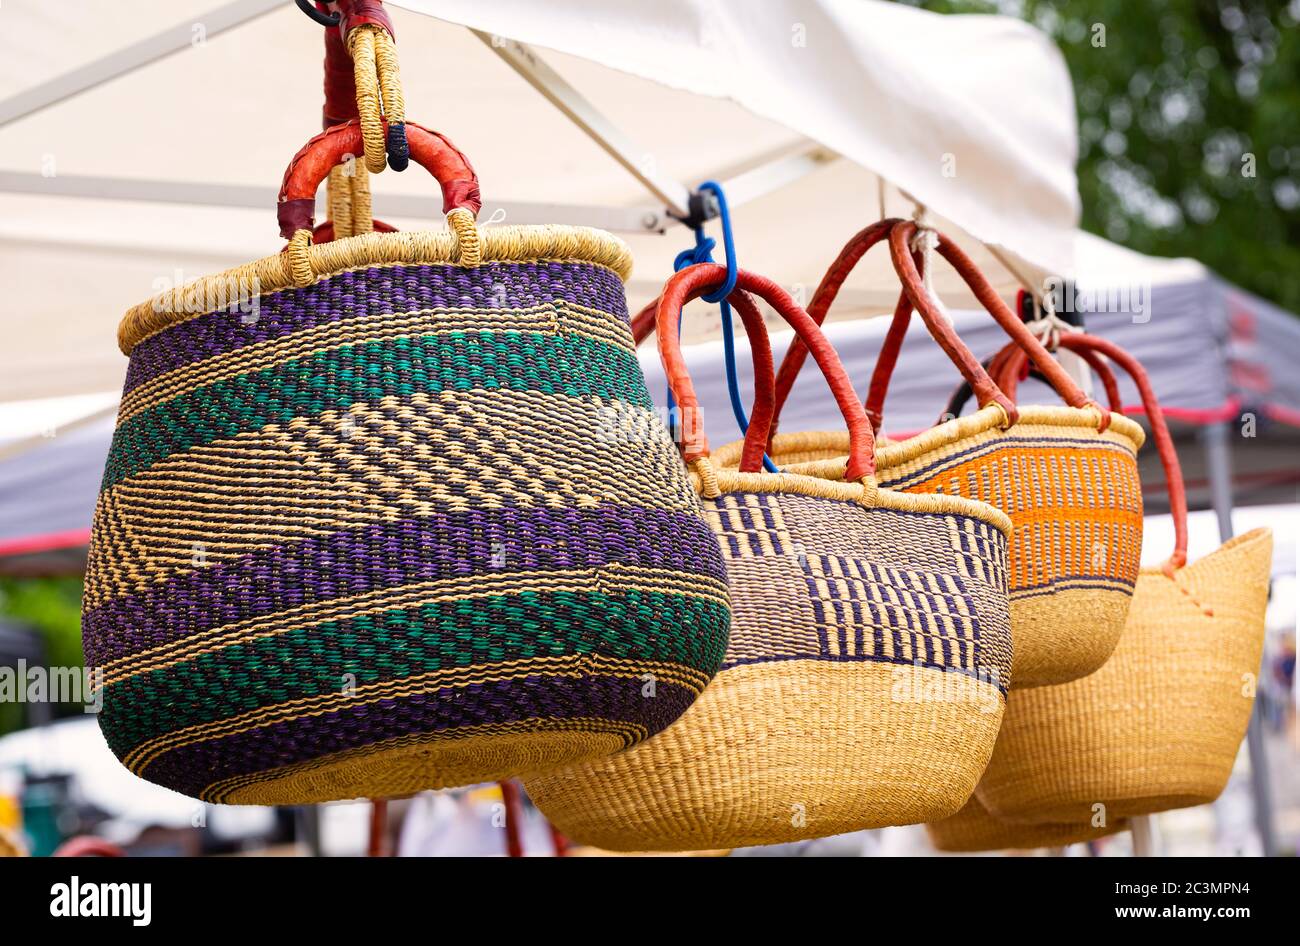 Large West African baskets with leather handles on display at a local outdoor market Stock Photo